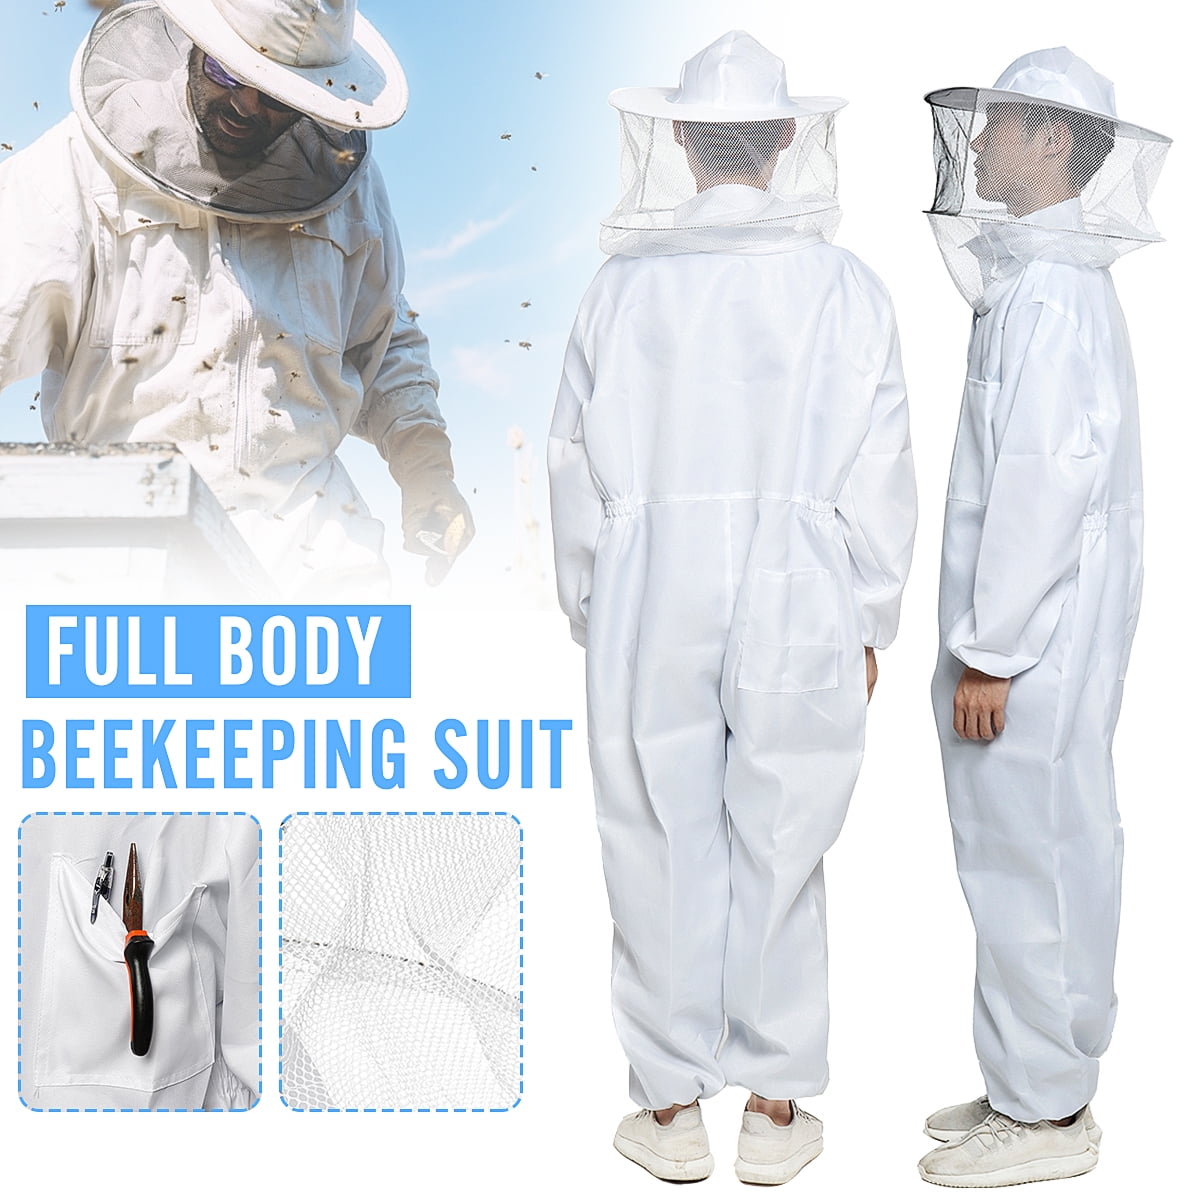 Fully Protective Beekeeping Ultra Ventilated Bee Jacket and Bee Suit with 3 XL 